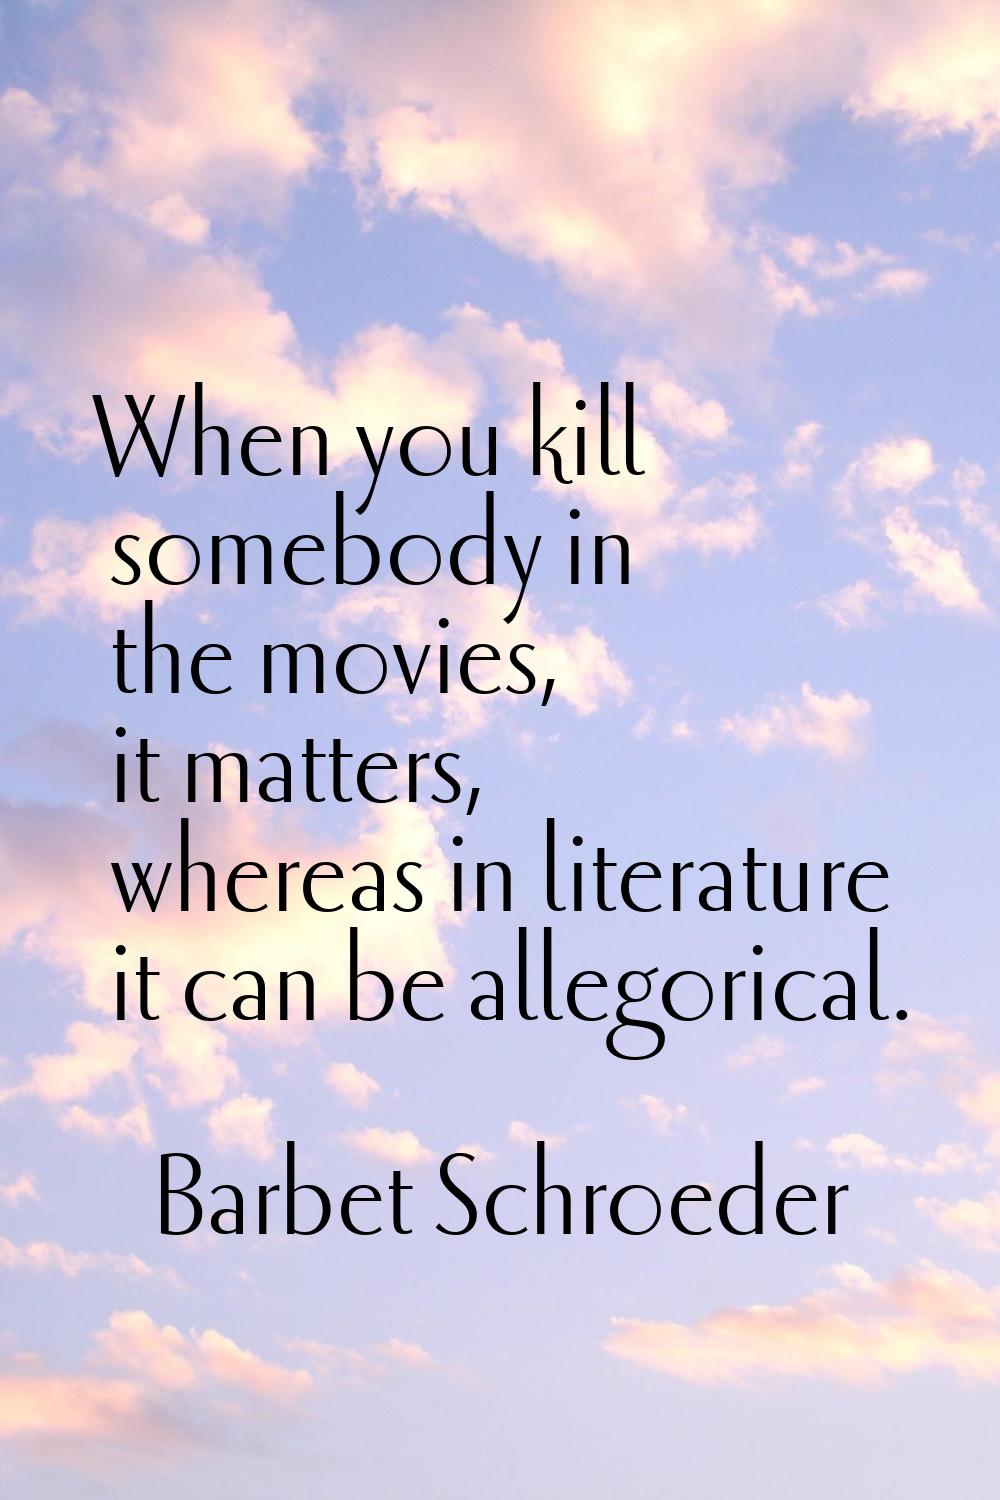 When you kill somebody in the movies, it matters, whereas in literature it can be allegorical.